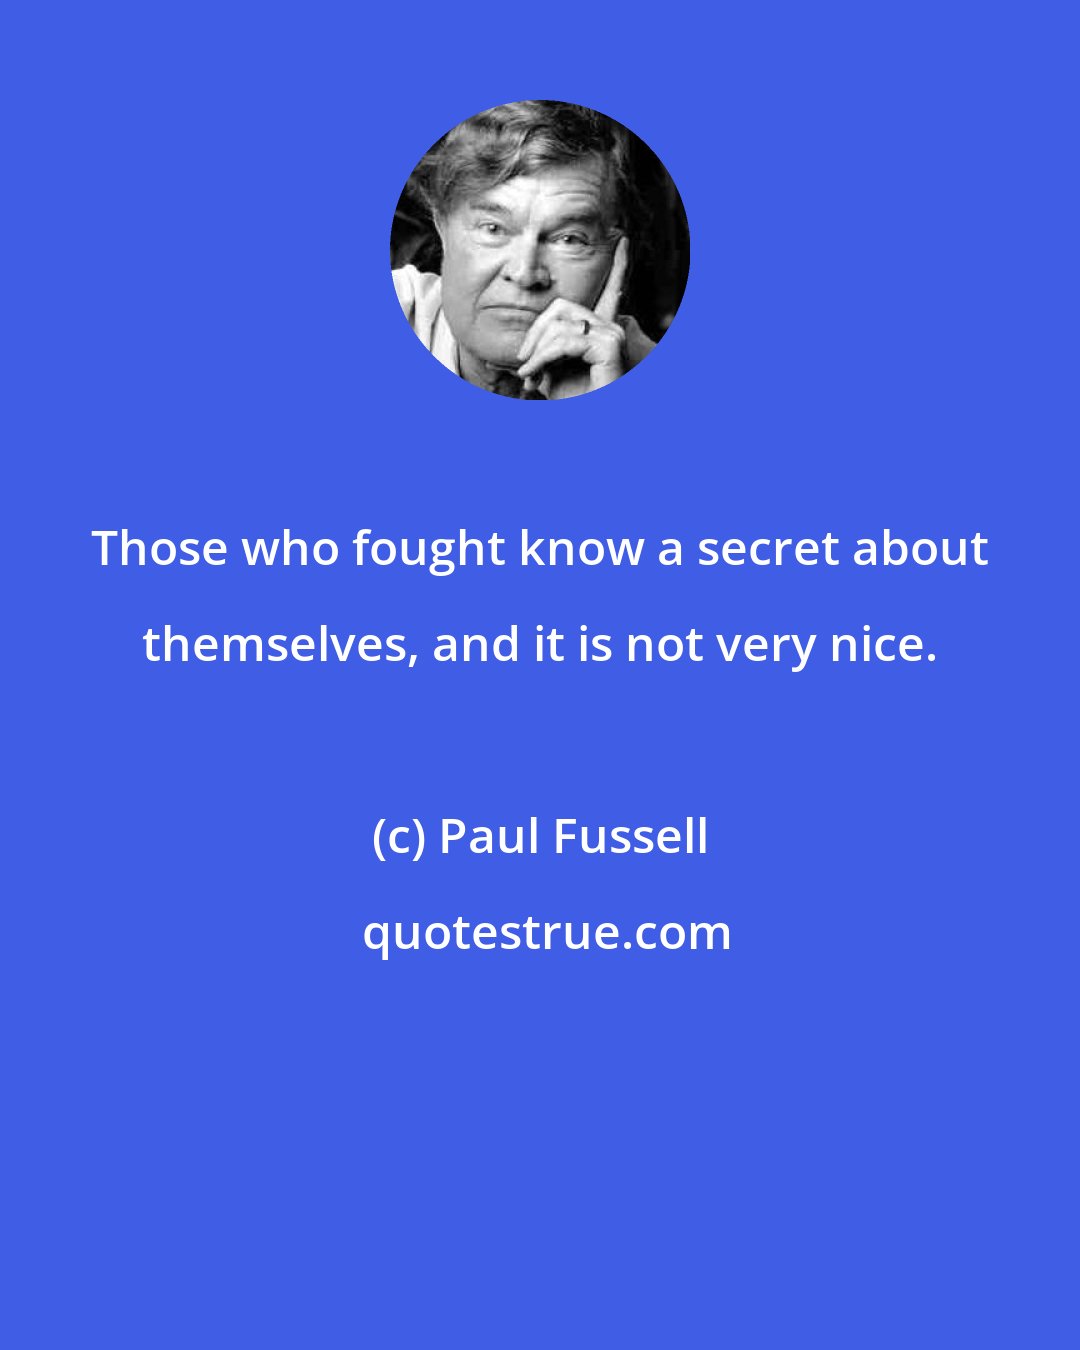 Paul Fussell: Those who fought know a secret about themselves, and it is not very nice.